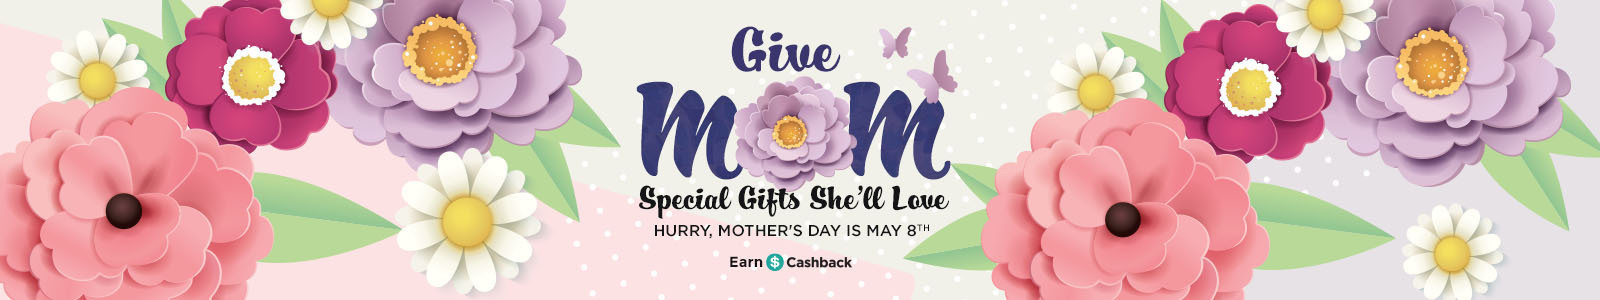 Give mom special gifts she'll love. Hurry Mother's Day is May 8th. Earn Cashback.